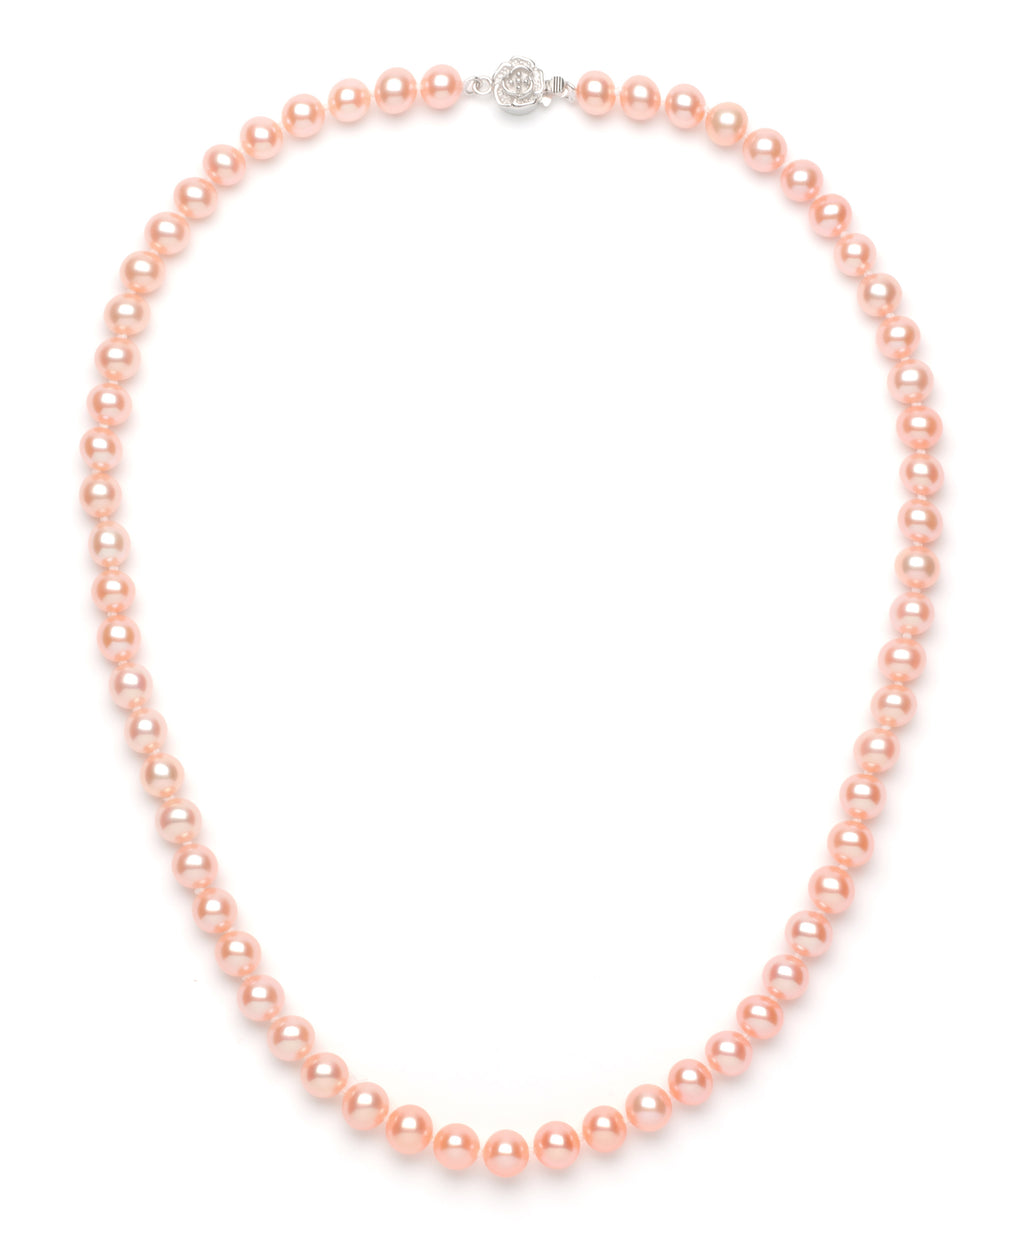 7.0-8.0 mm Pink Freshwater Pearl Necklace